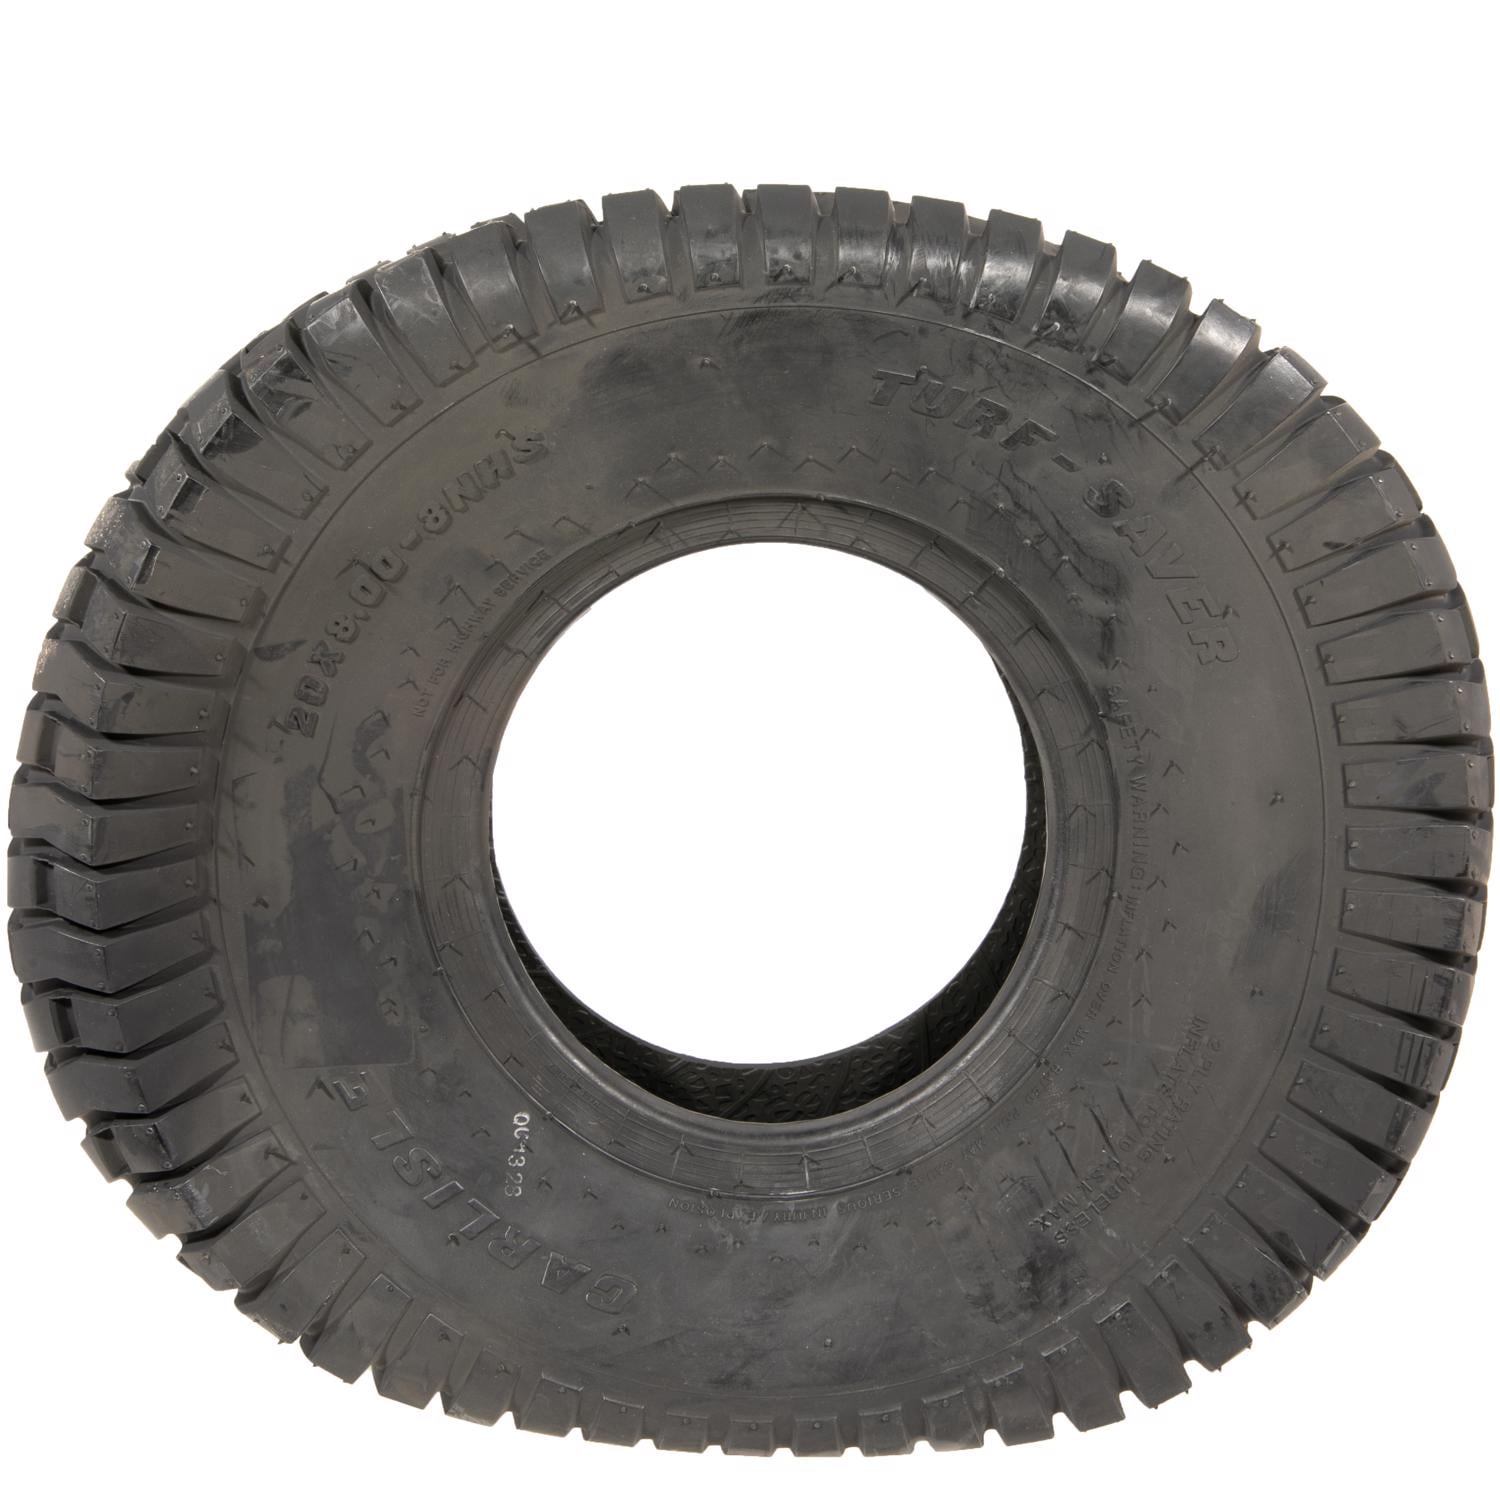 Picture of Arnold 7013820 8 x 20 in. Tubeless Lawn Mower Replacement Tire